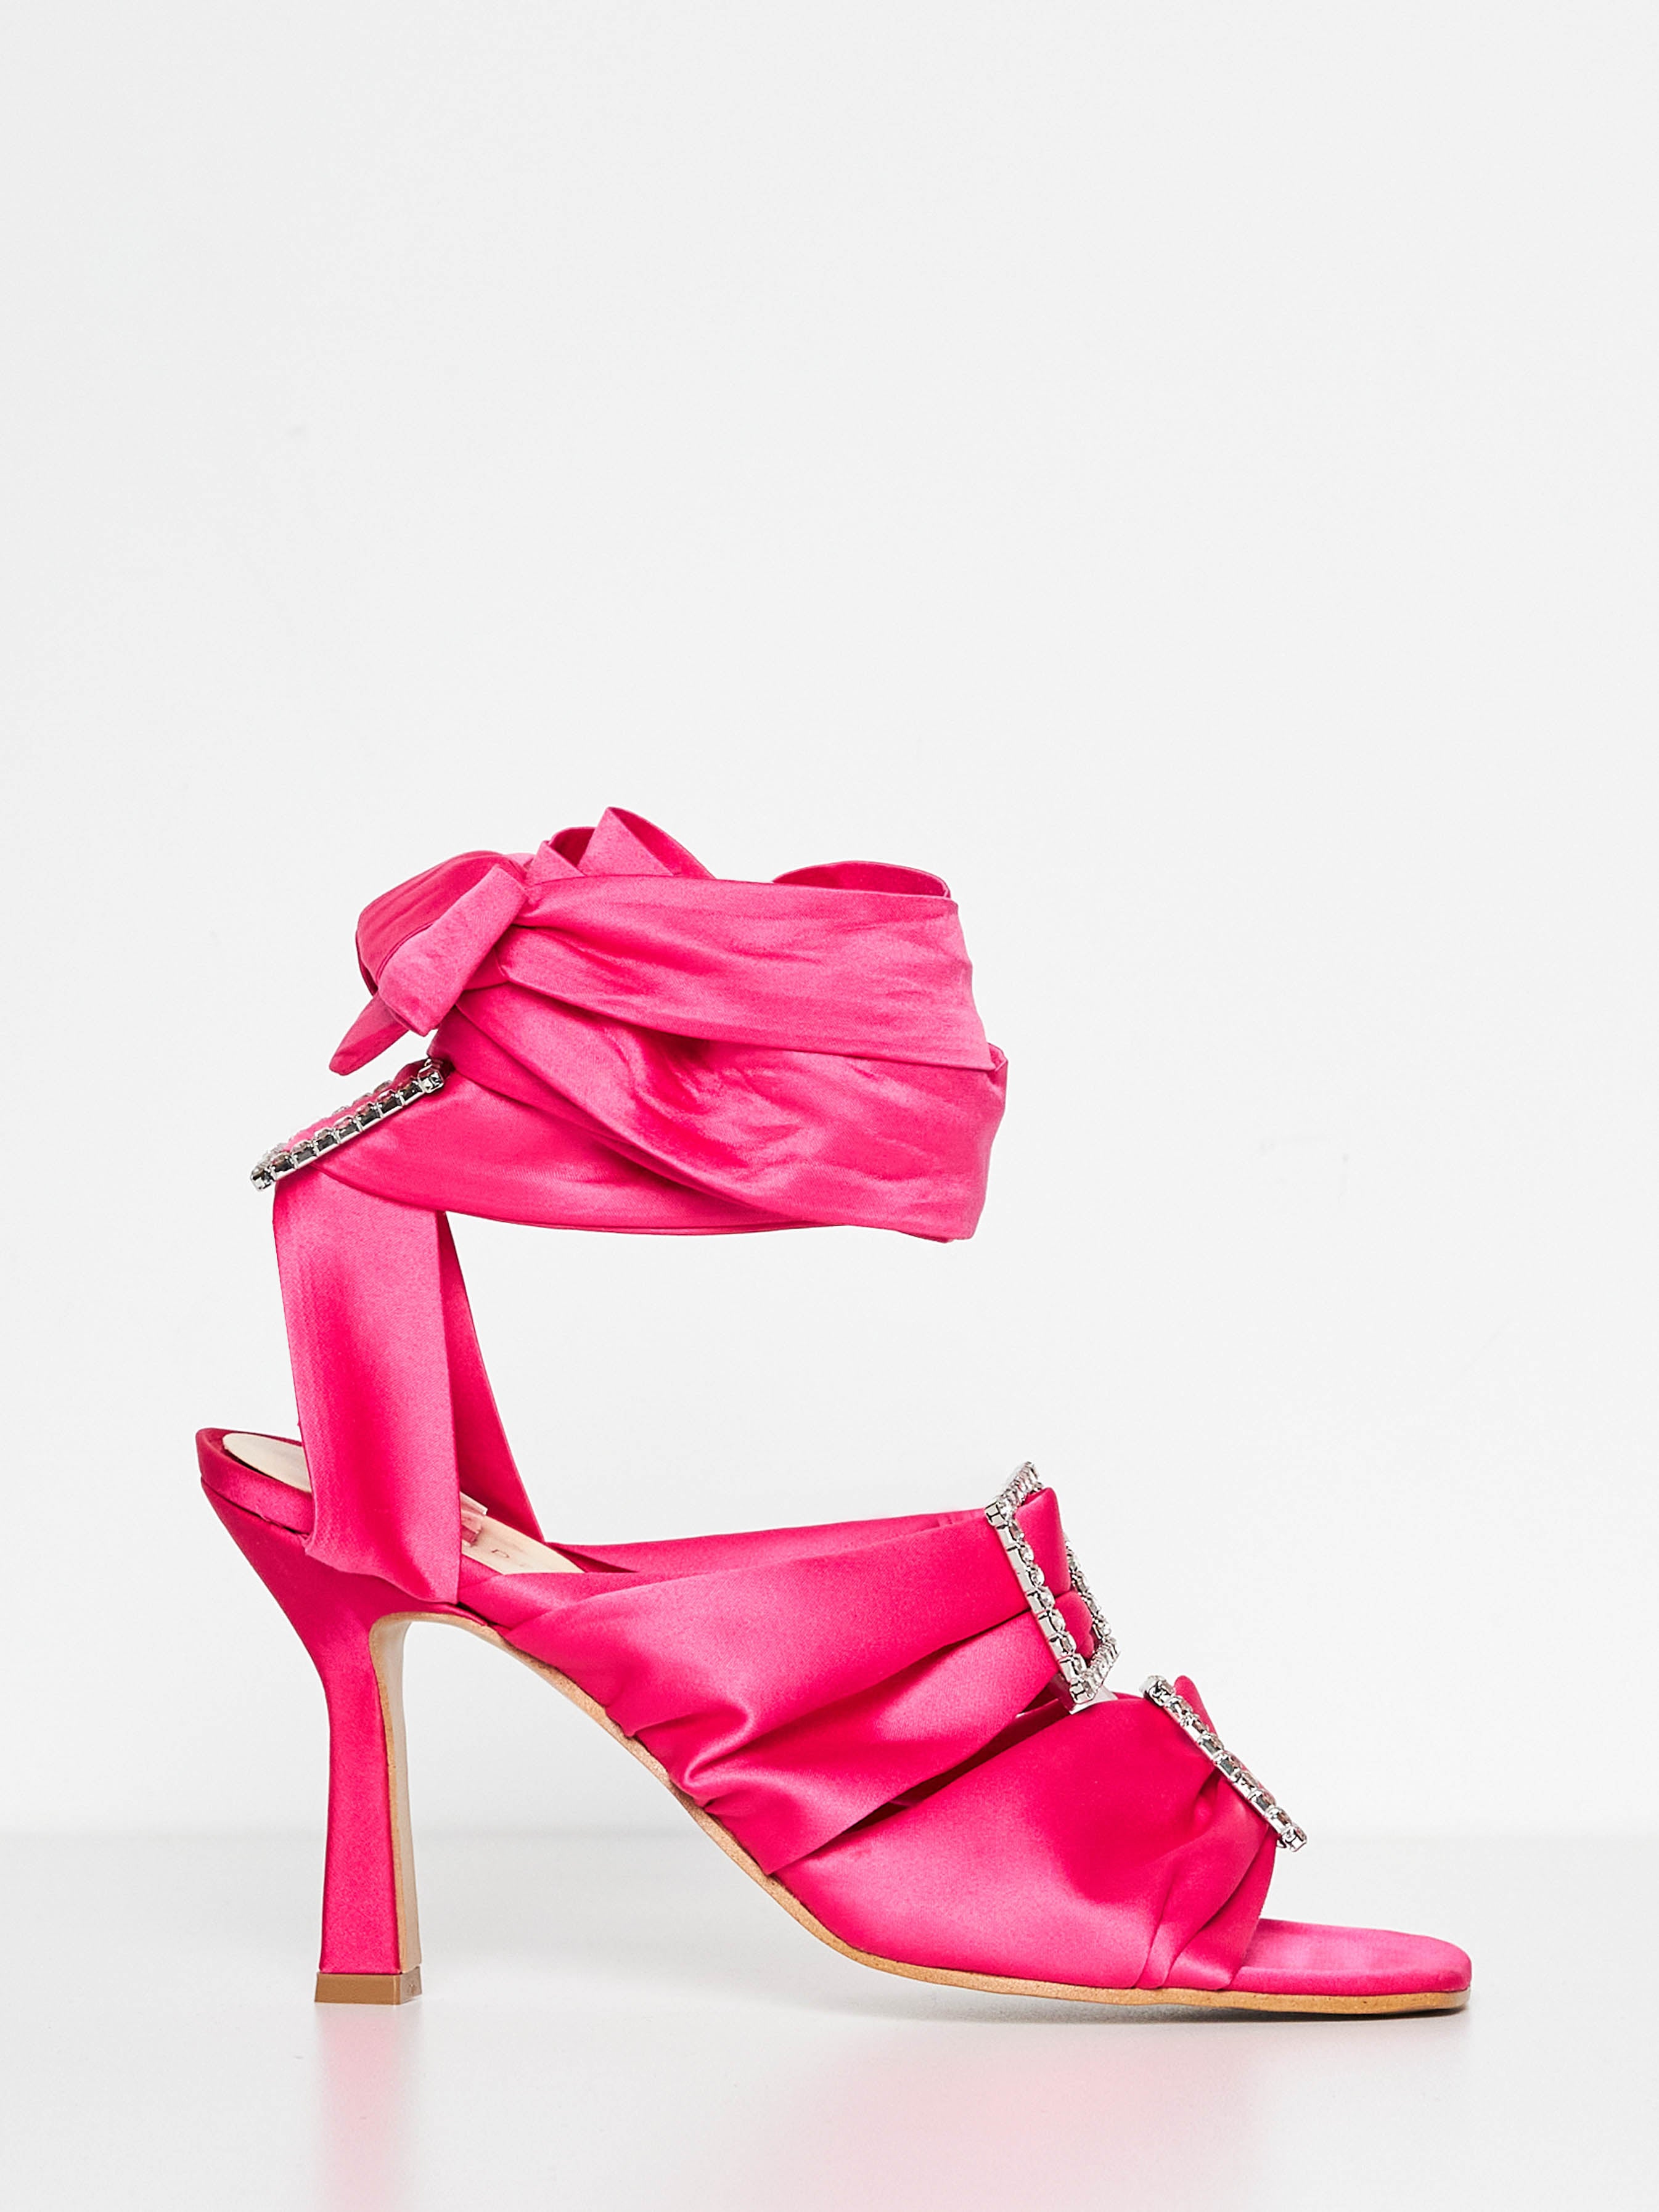 Matilde Couture fuchsia sandals with crossed laces